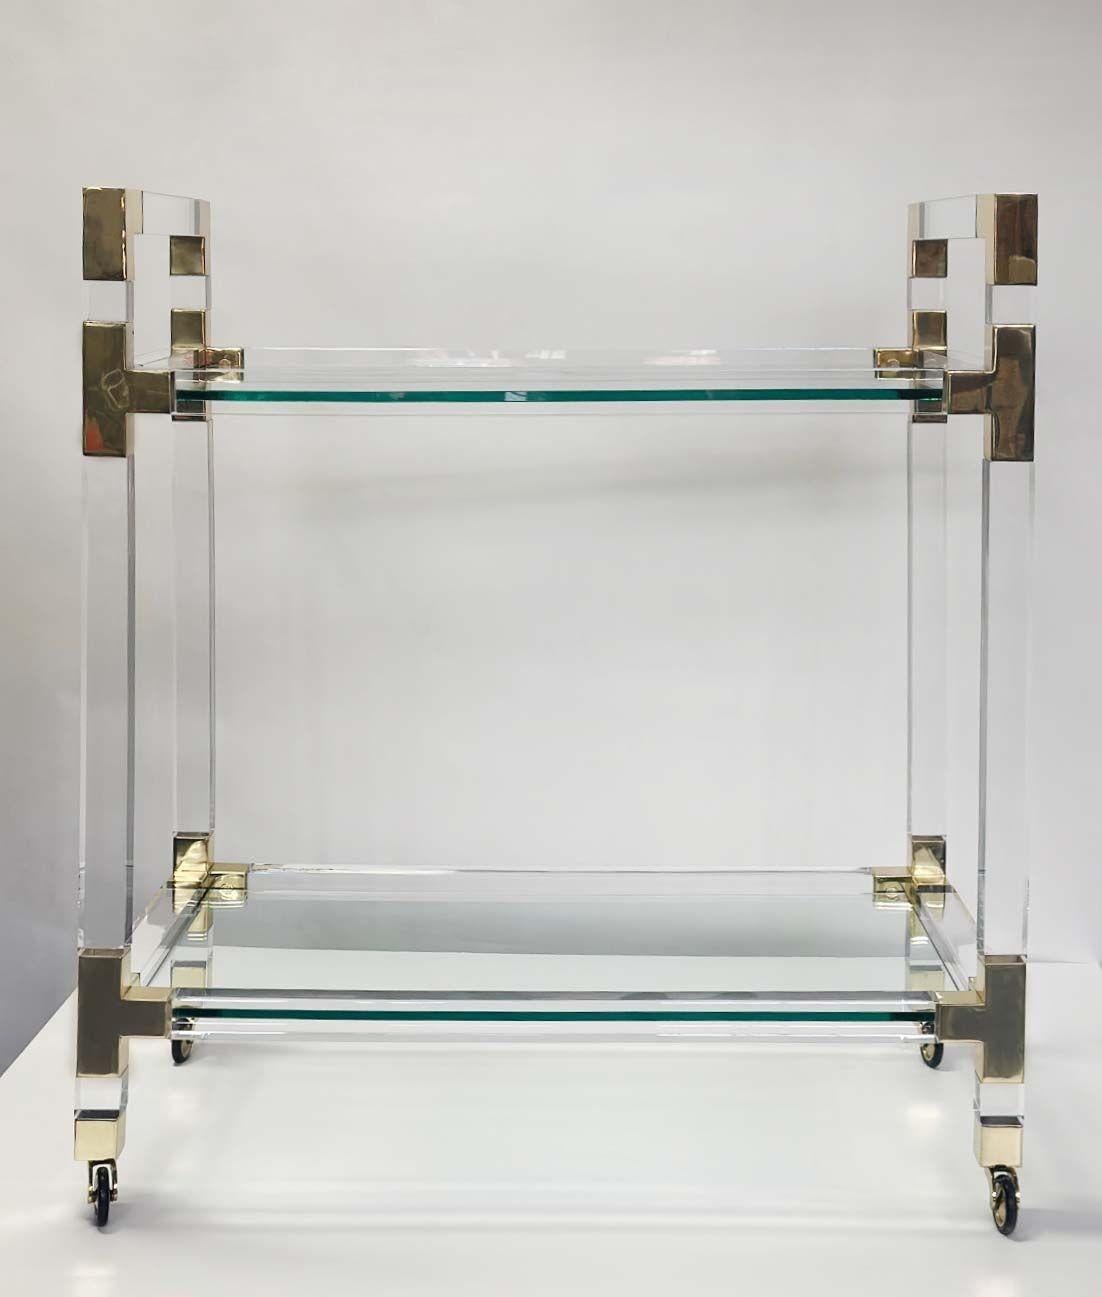 Vintage acrylic, brass and glass bar cart by Charles Hollis Jones. Made in USA, circa 1970s.
Dimensions:
36.5